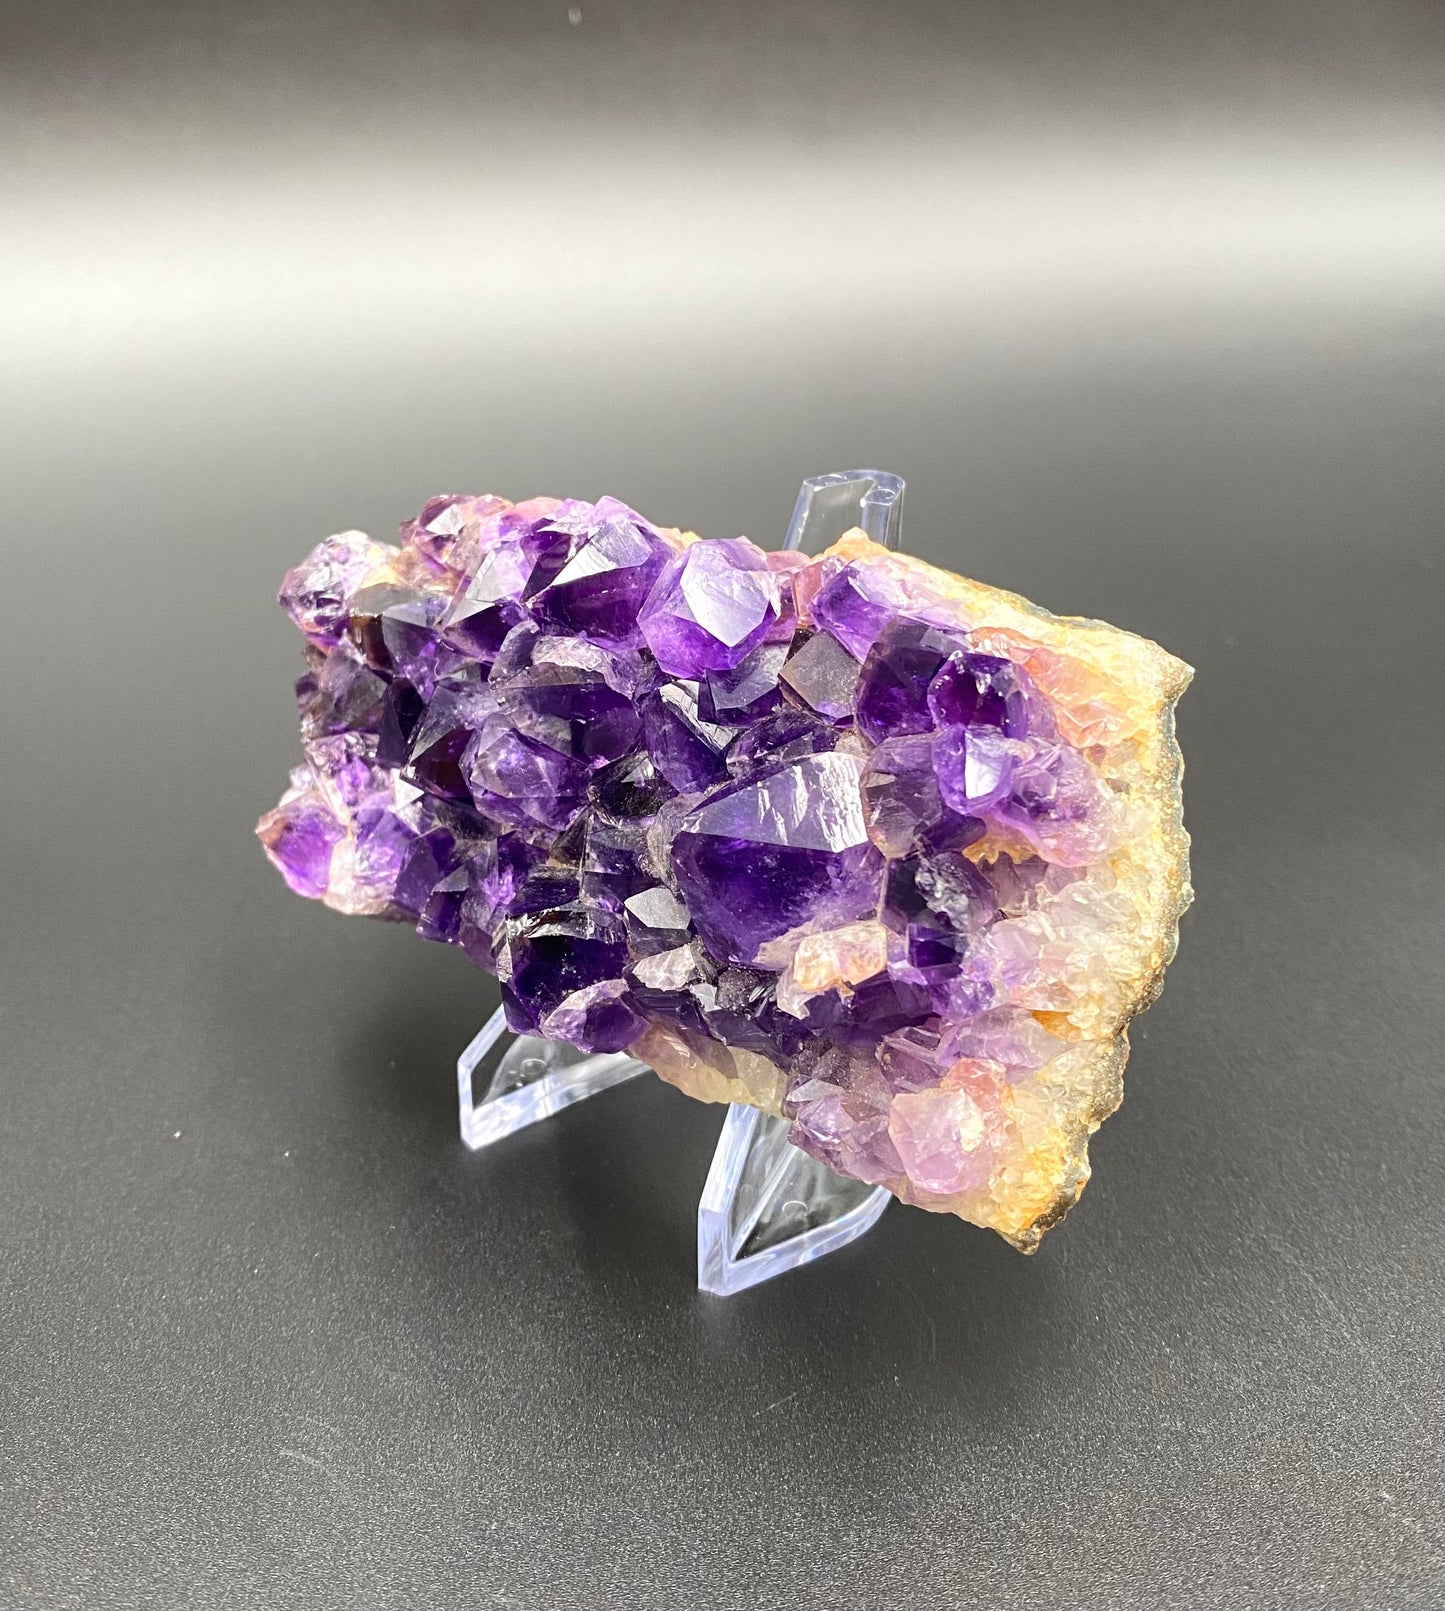 Follow Your Intuition: "Trust" Amethyst Druzy Plate